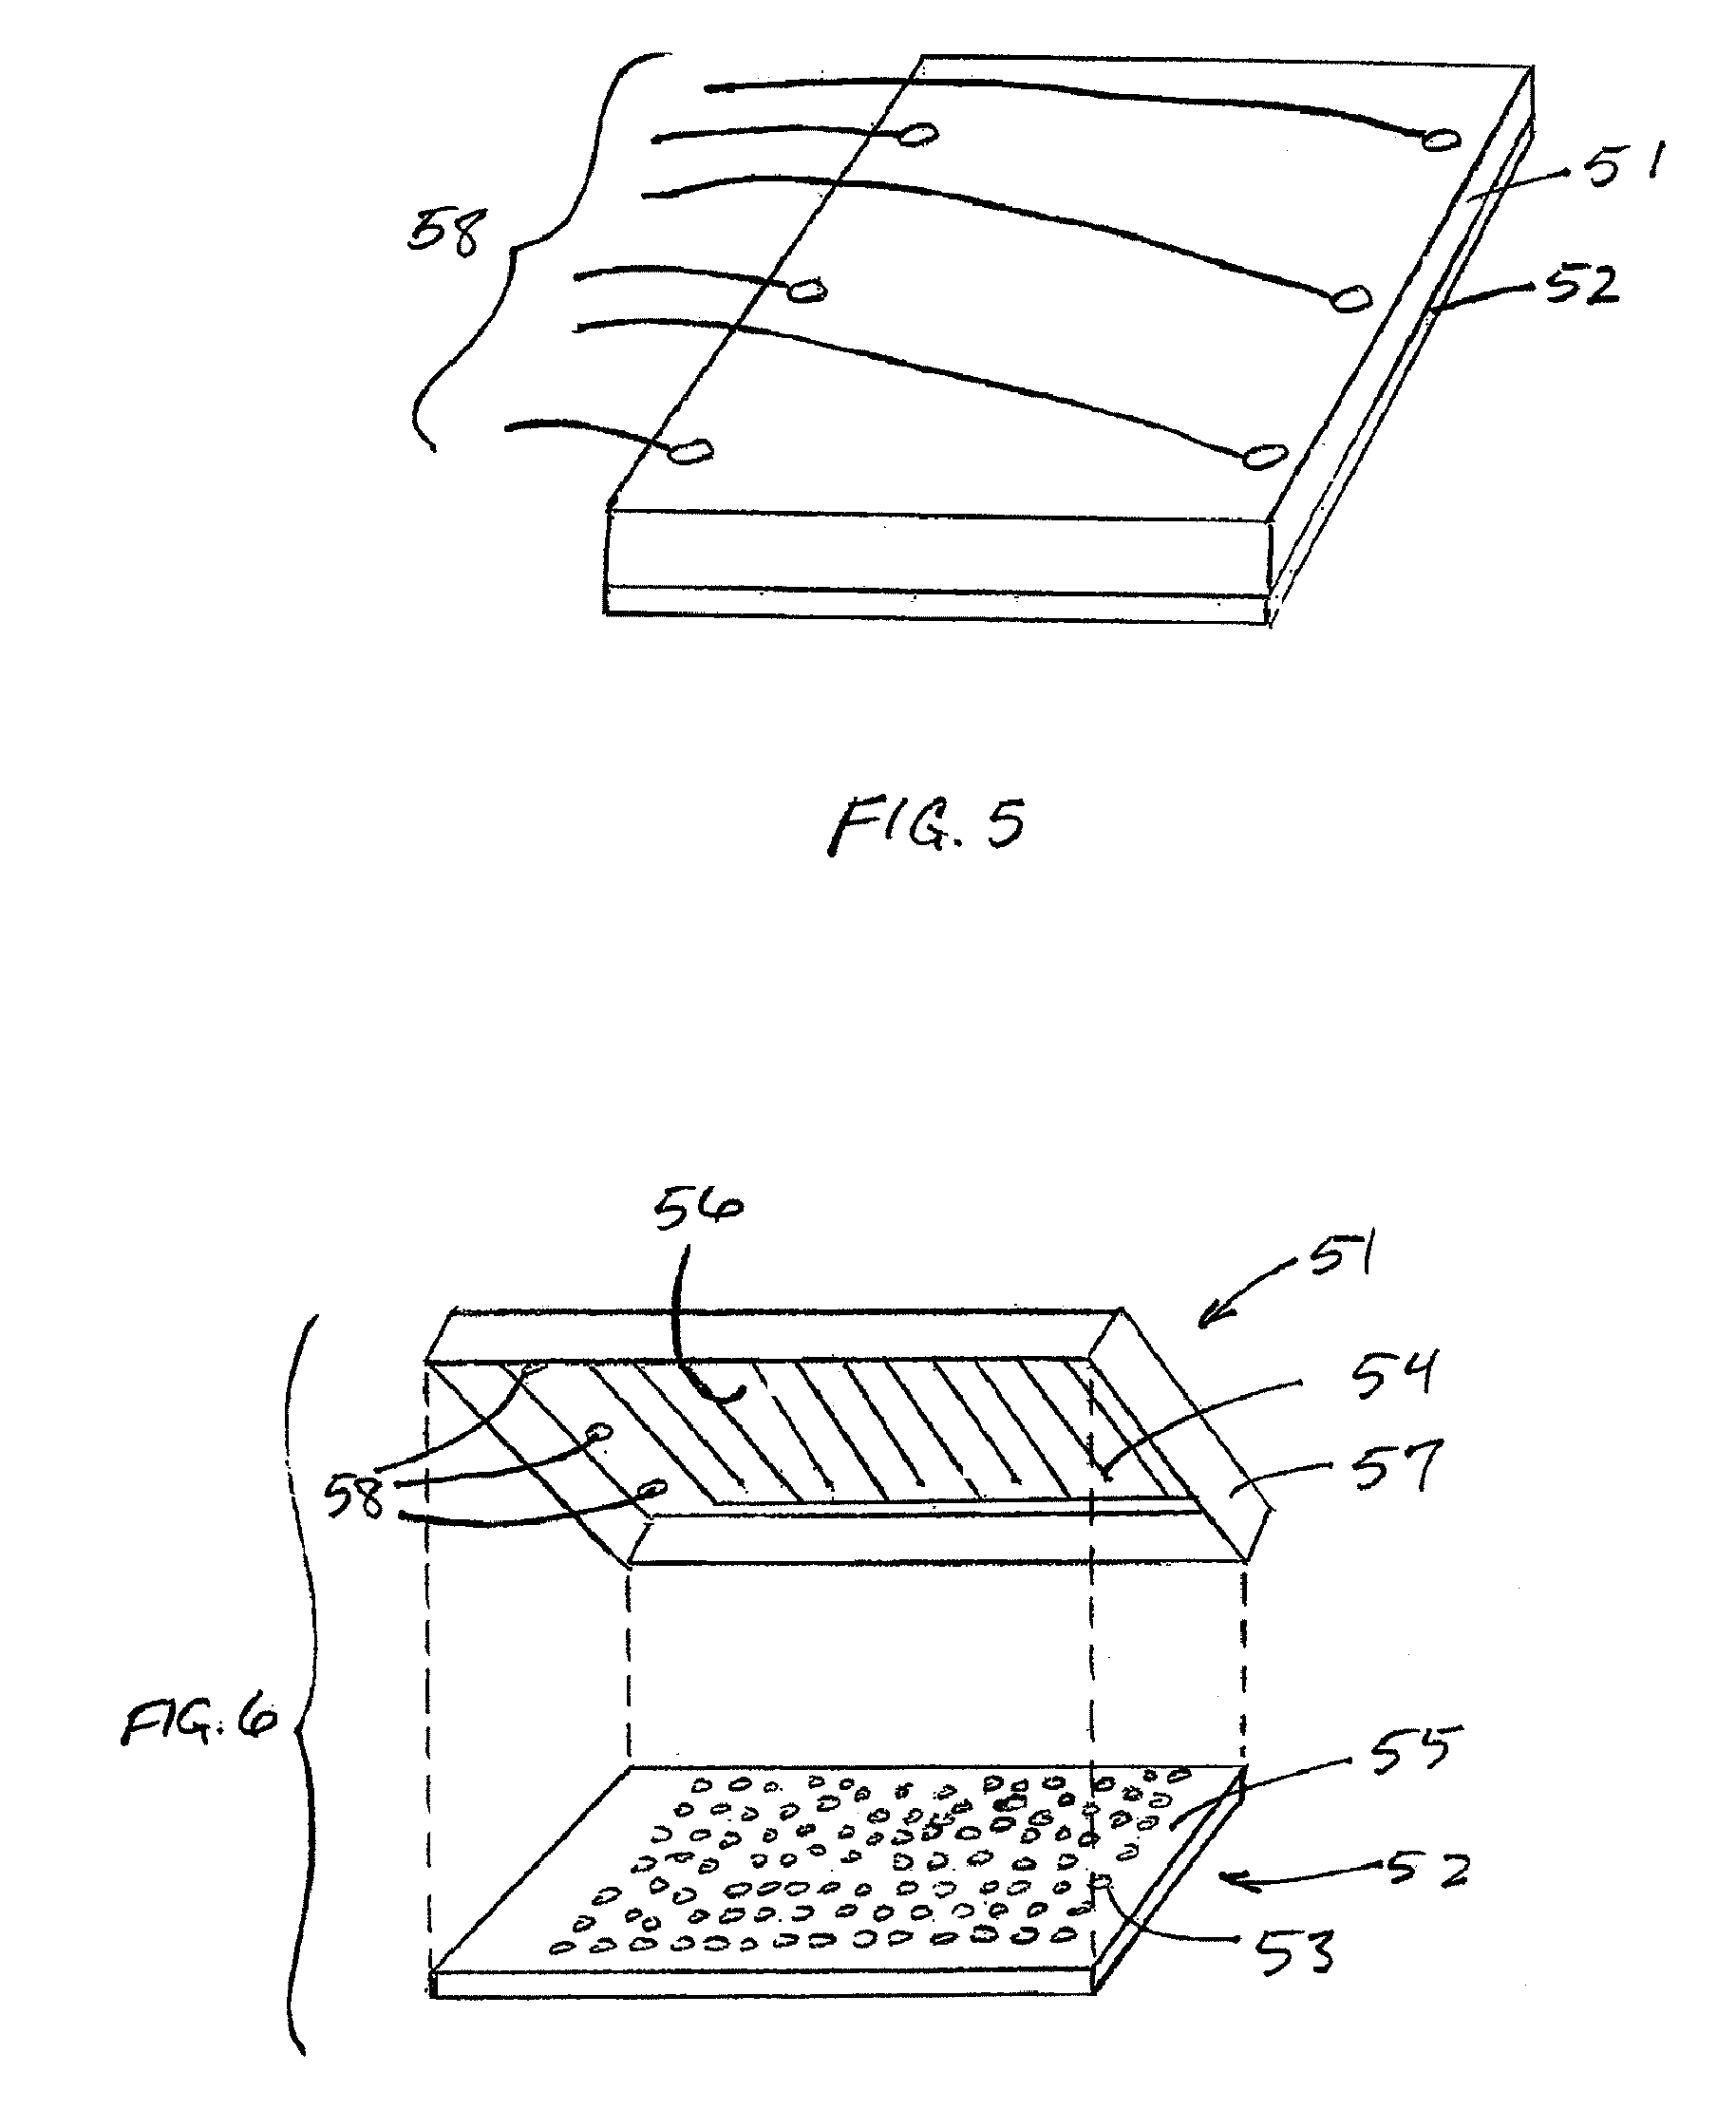 Electroporation of adherent cells with an array of closely spaced electrodes